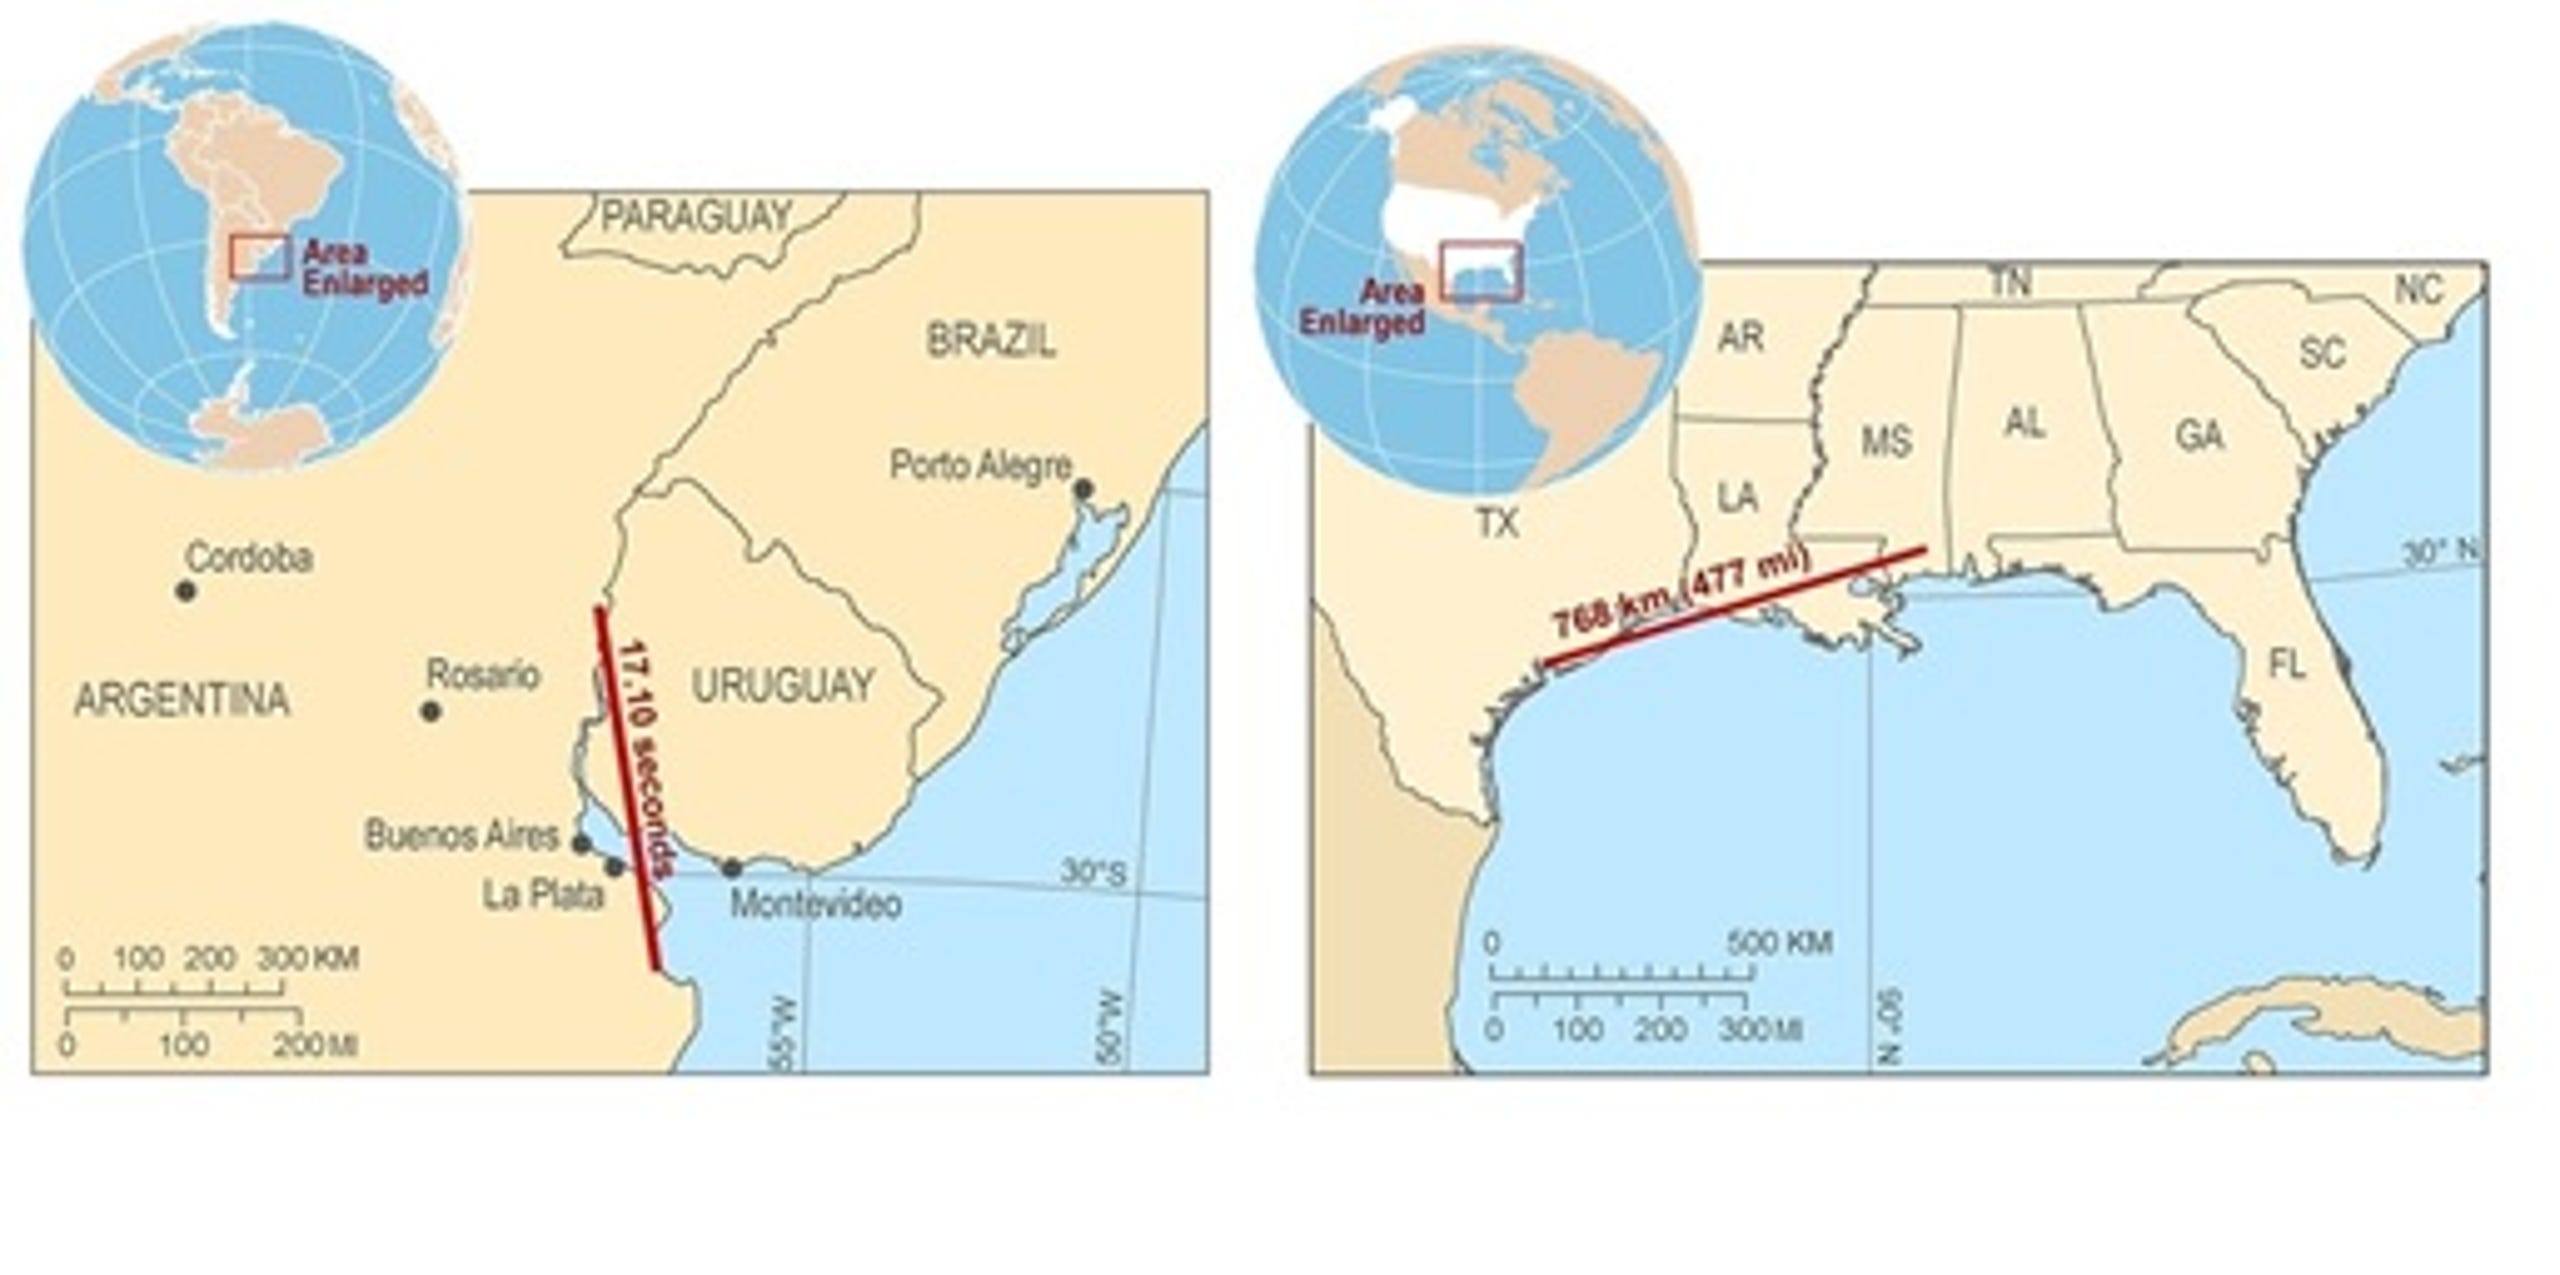 New records were set for both the duration of a lightning strike (left, in South America) and for length of a lightning strikes (right, in the U.S.)